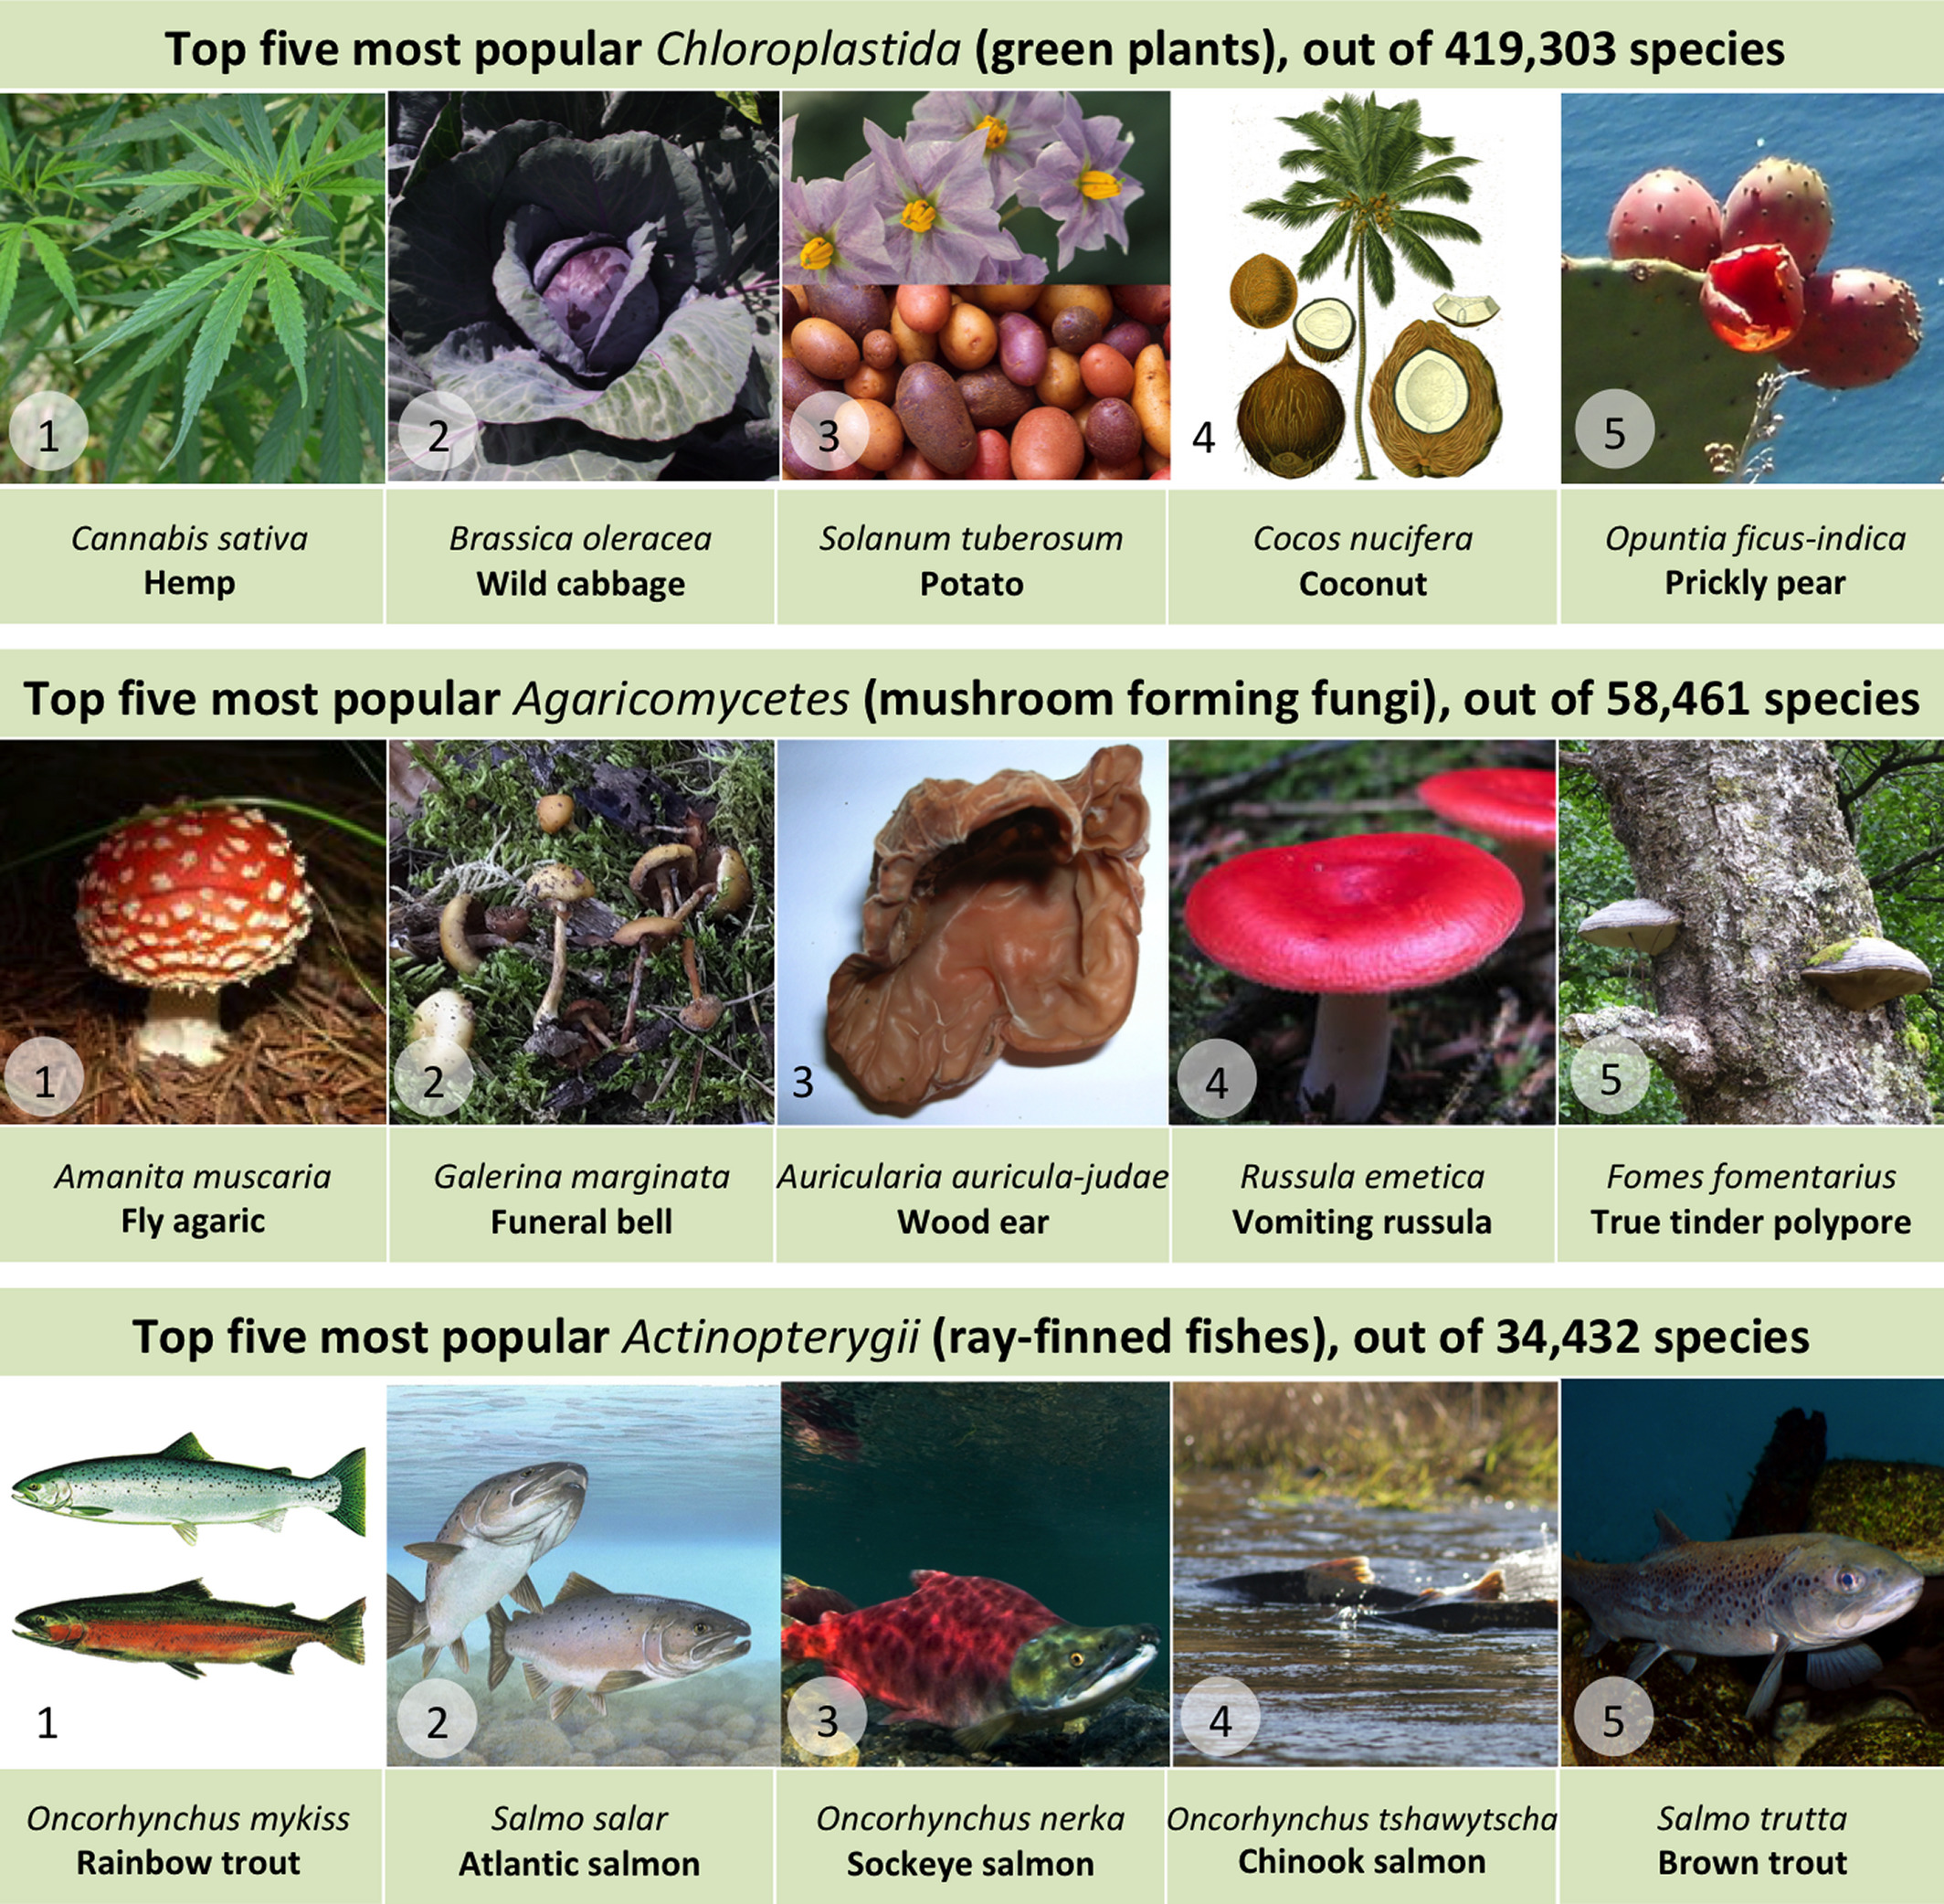 Most popular organisms include cannabis, fly agaric and rainbow trout.